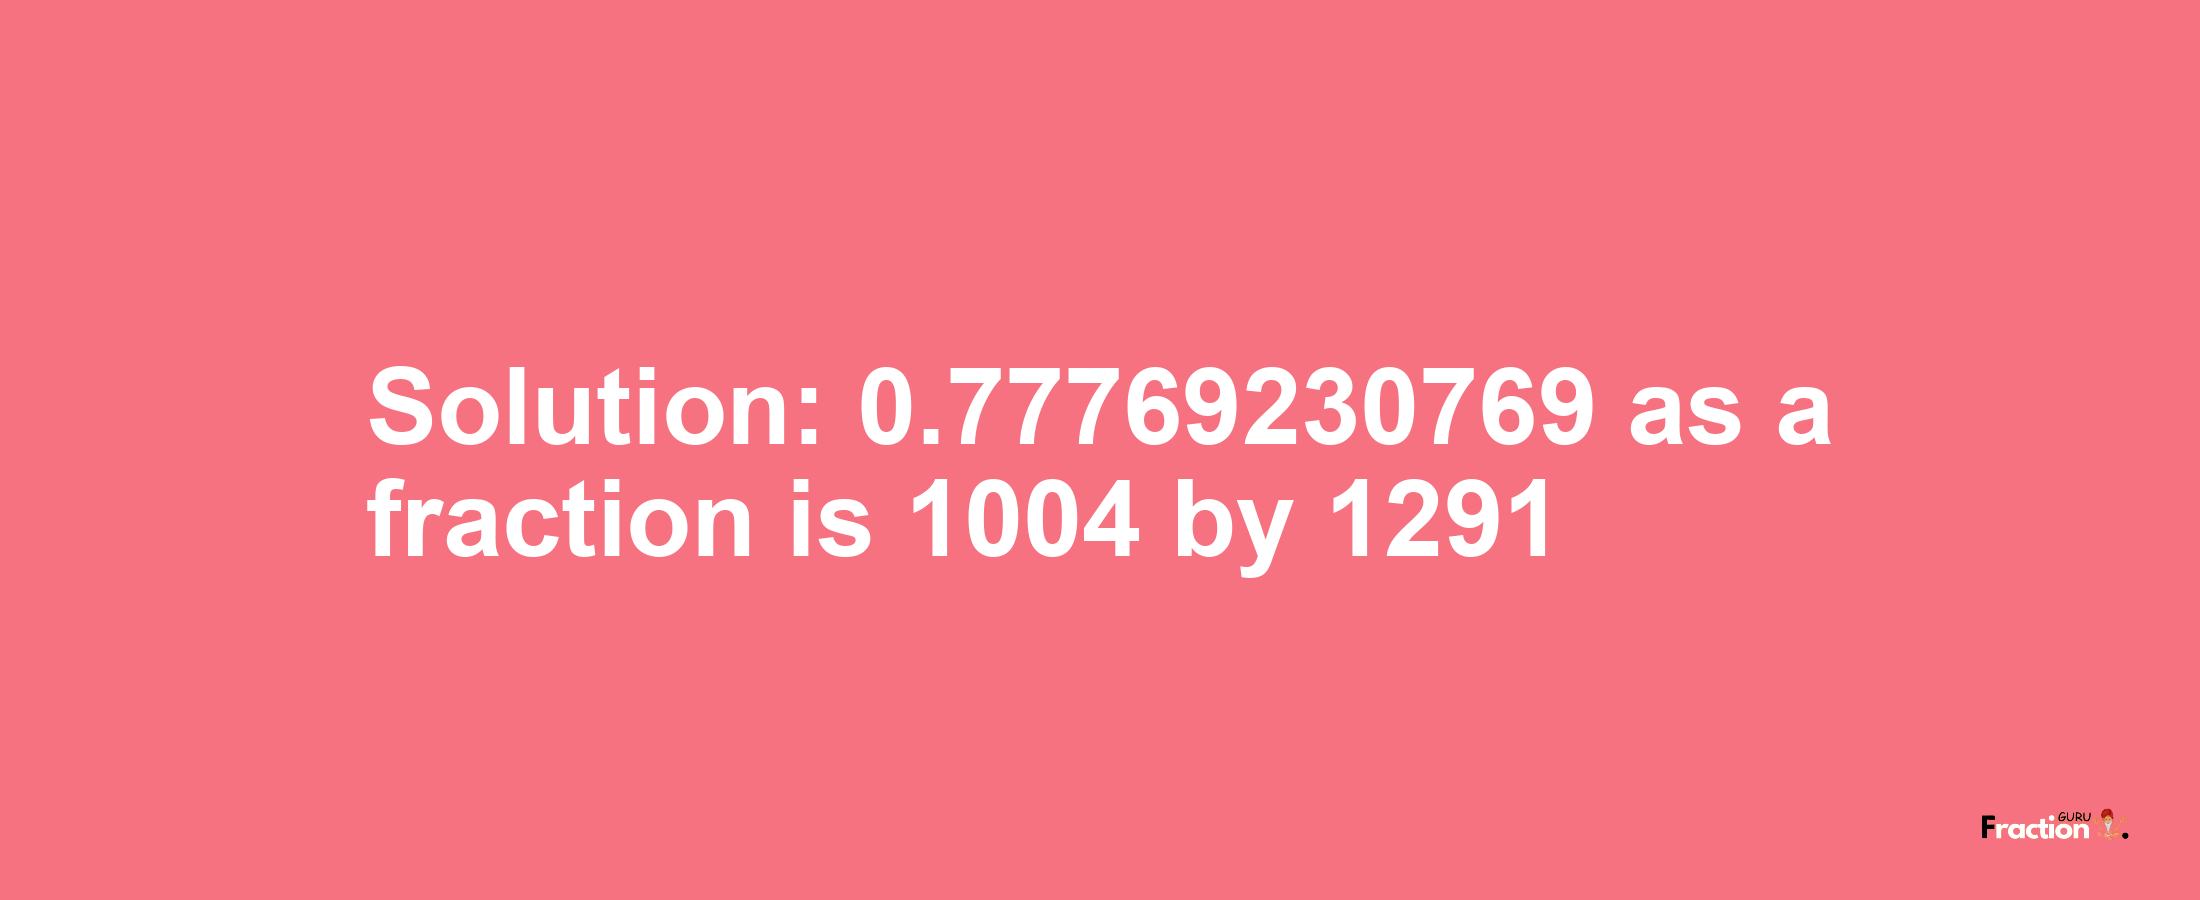 Solution:0.77769230769 as a fraction is 1004/1291